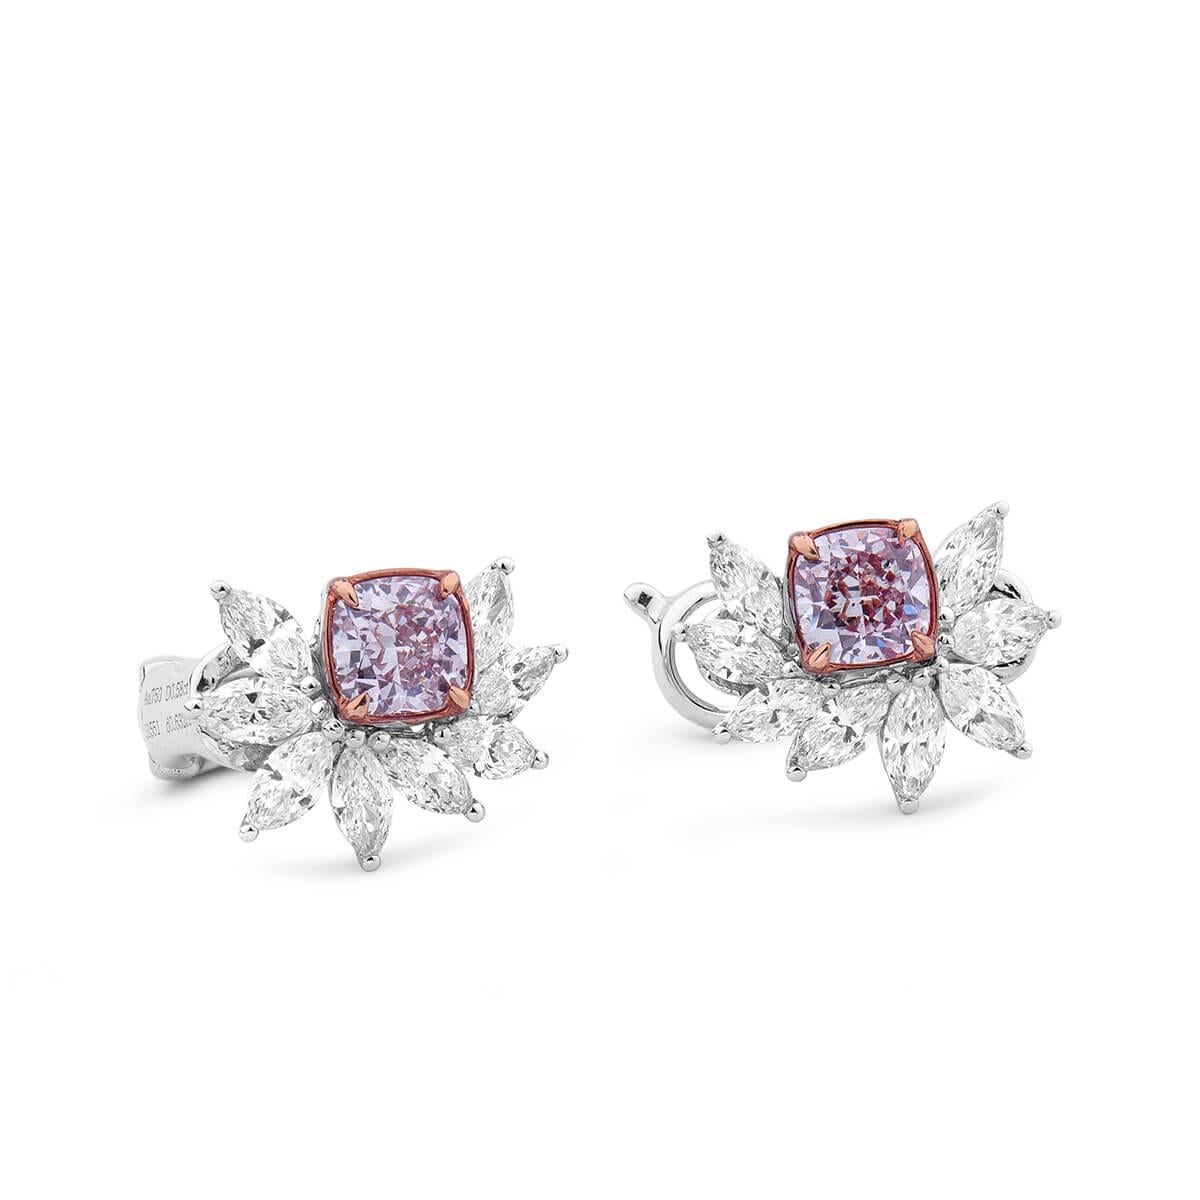 FANCY PINK DIAMOND EARRINGS - 2.43 CT


Set in 18KT White gold


Total pink diamond weight: 1.16 ct
[ 2 diamonds ]
Color: Faint pink
Clarity: SI2

Total marquise cut white diamond weight: 1.26 ct
[ 16 diamonds ]
Color: G-H
Clarity: VS

Total